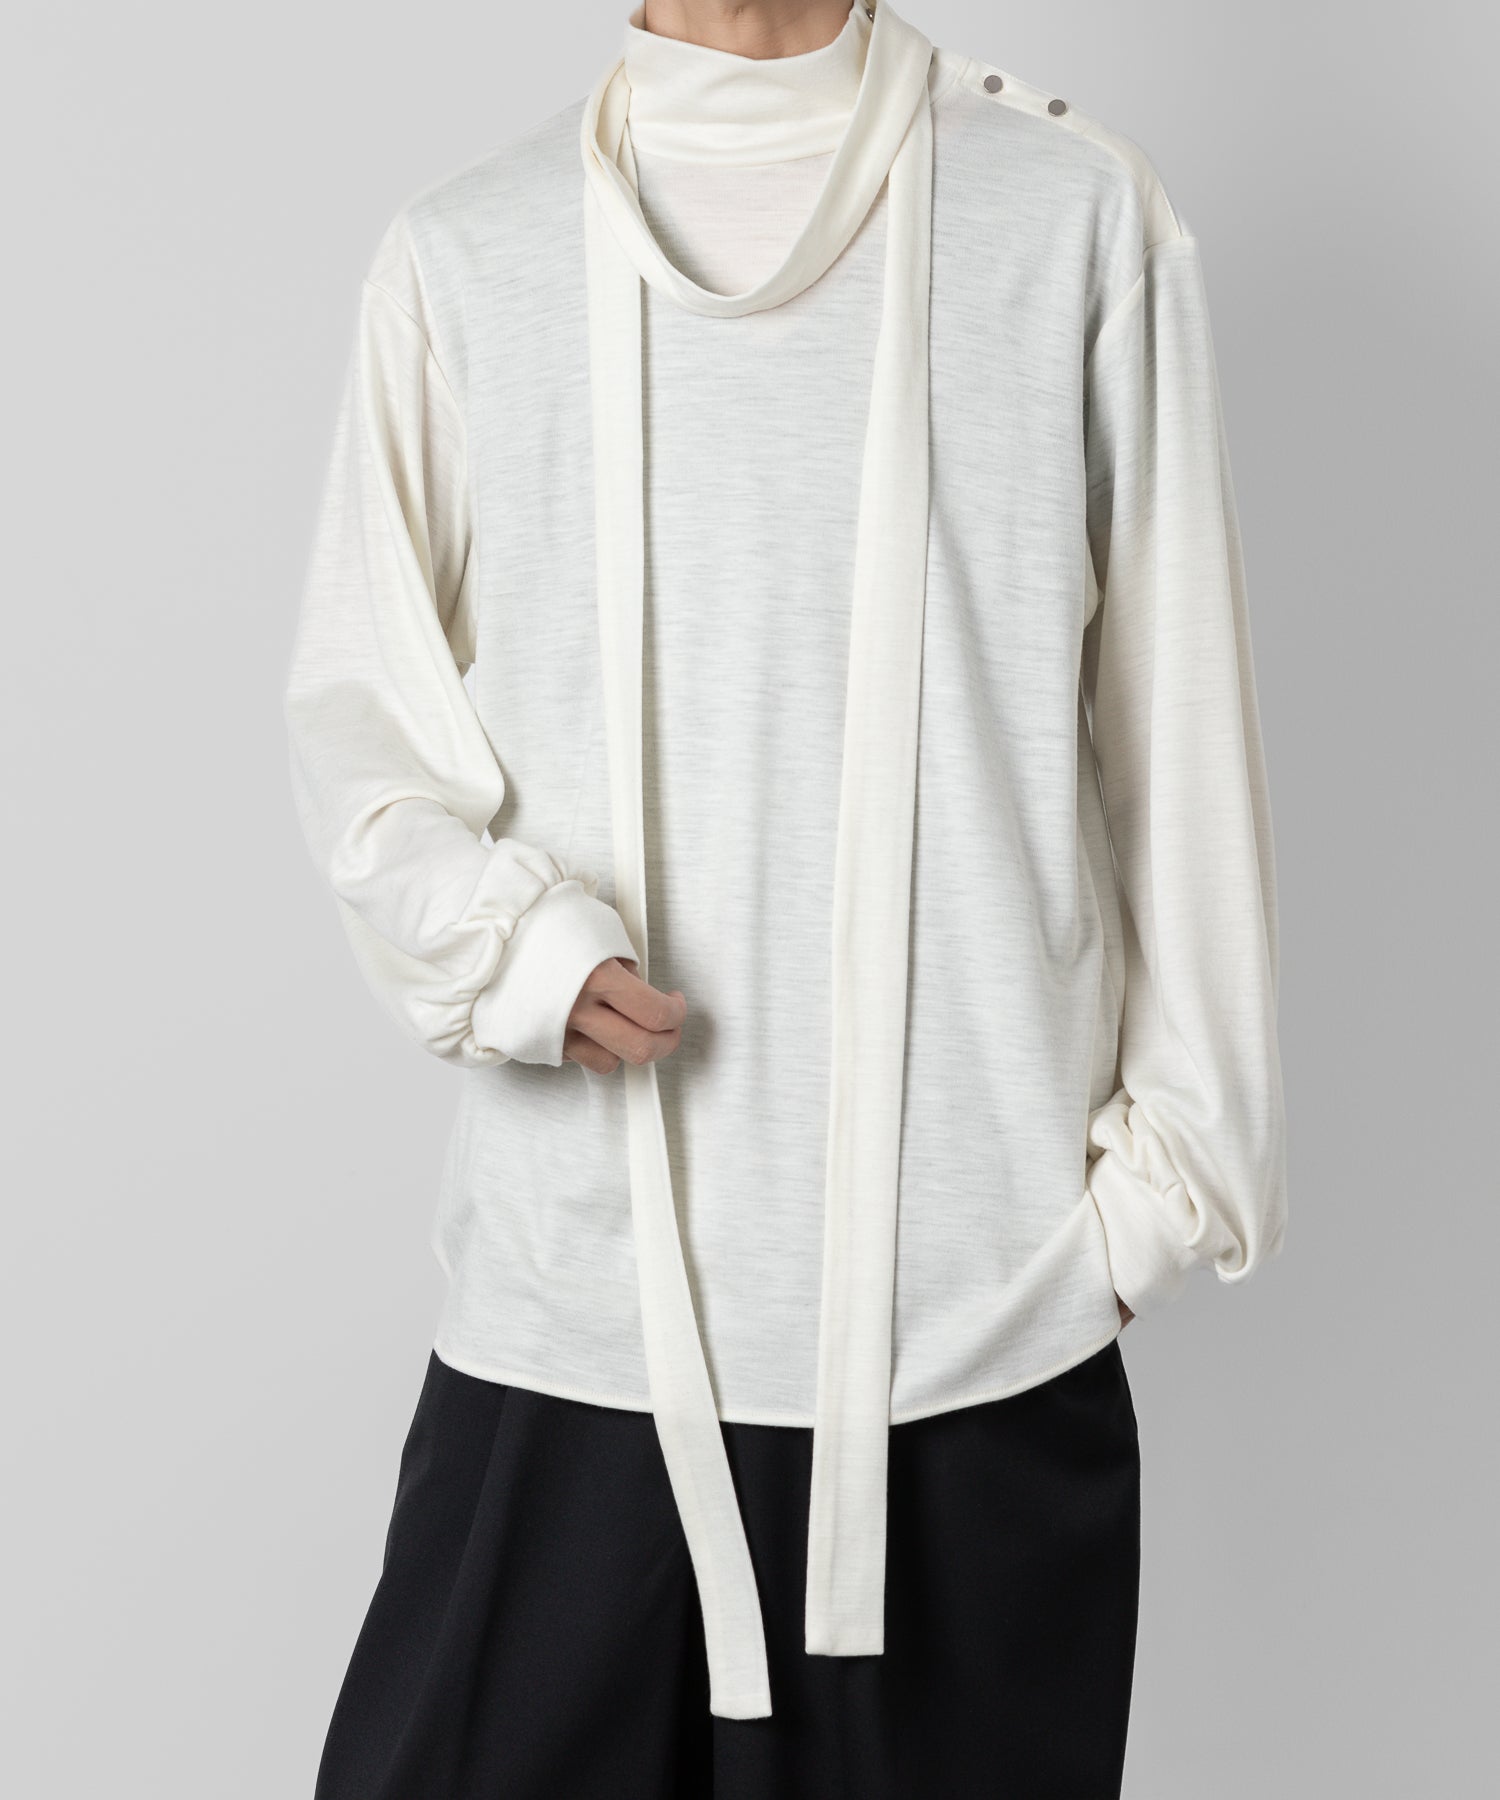 ato(アトウ)のSTAND COLLAR JERSEY WITH STALLのOFF WHITE